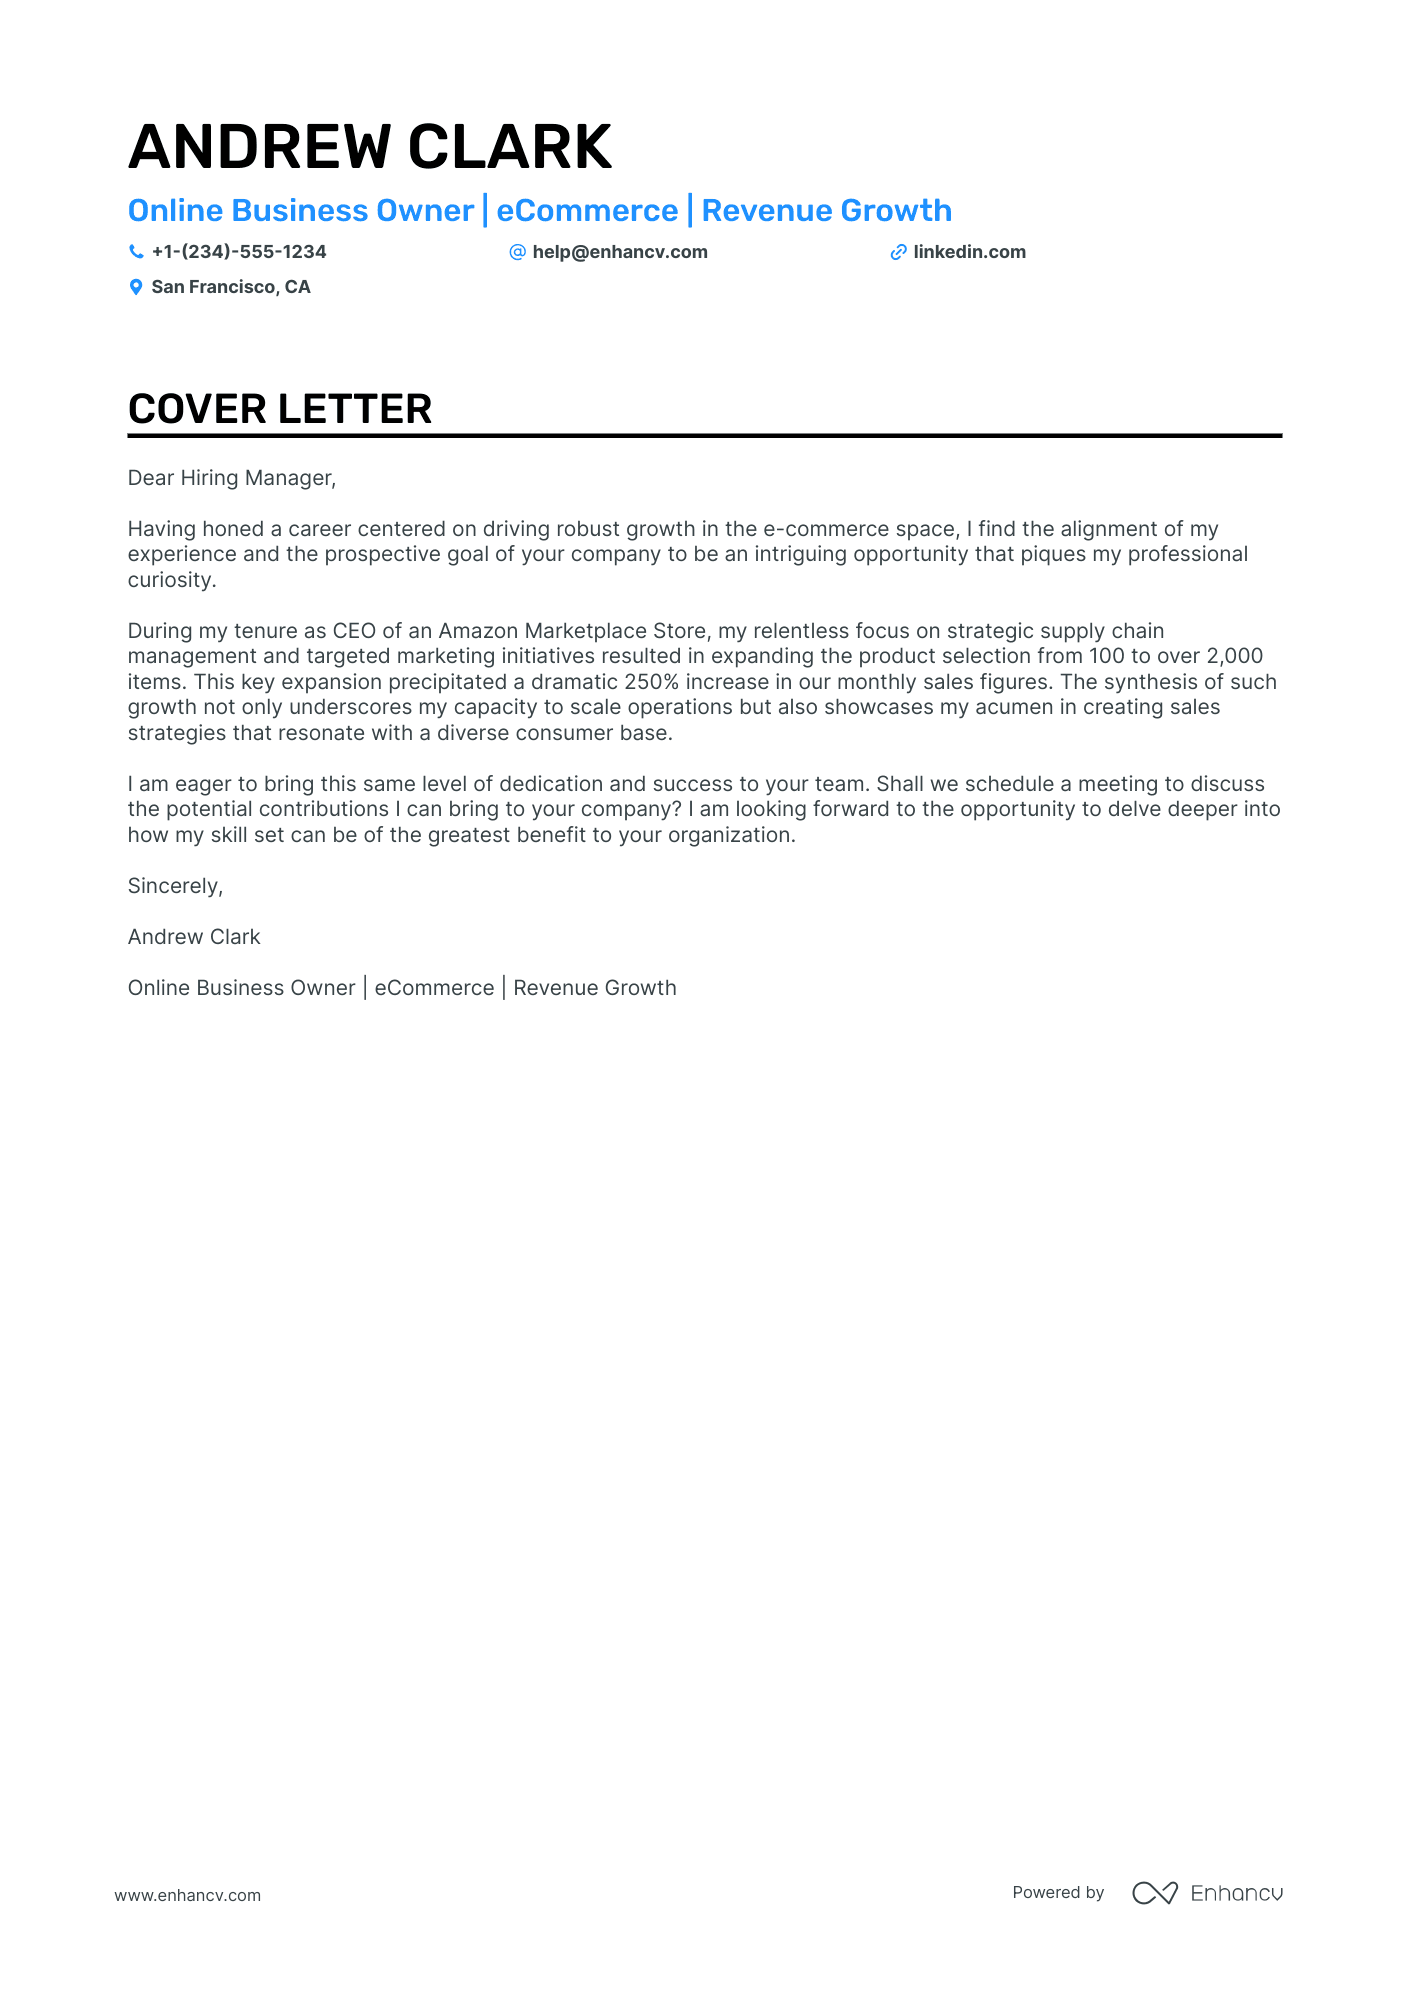 Online Business Owner Resume Example